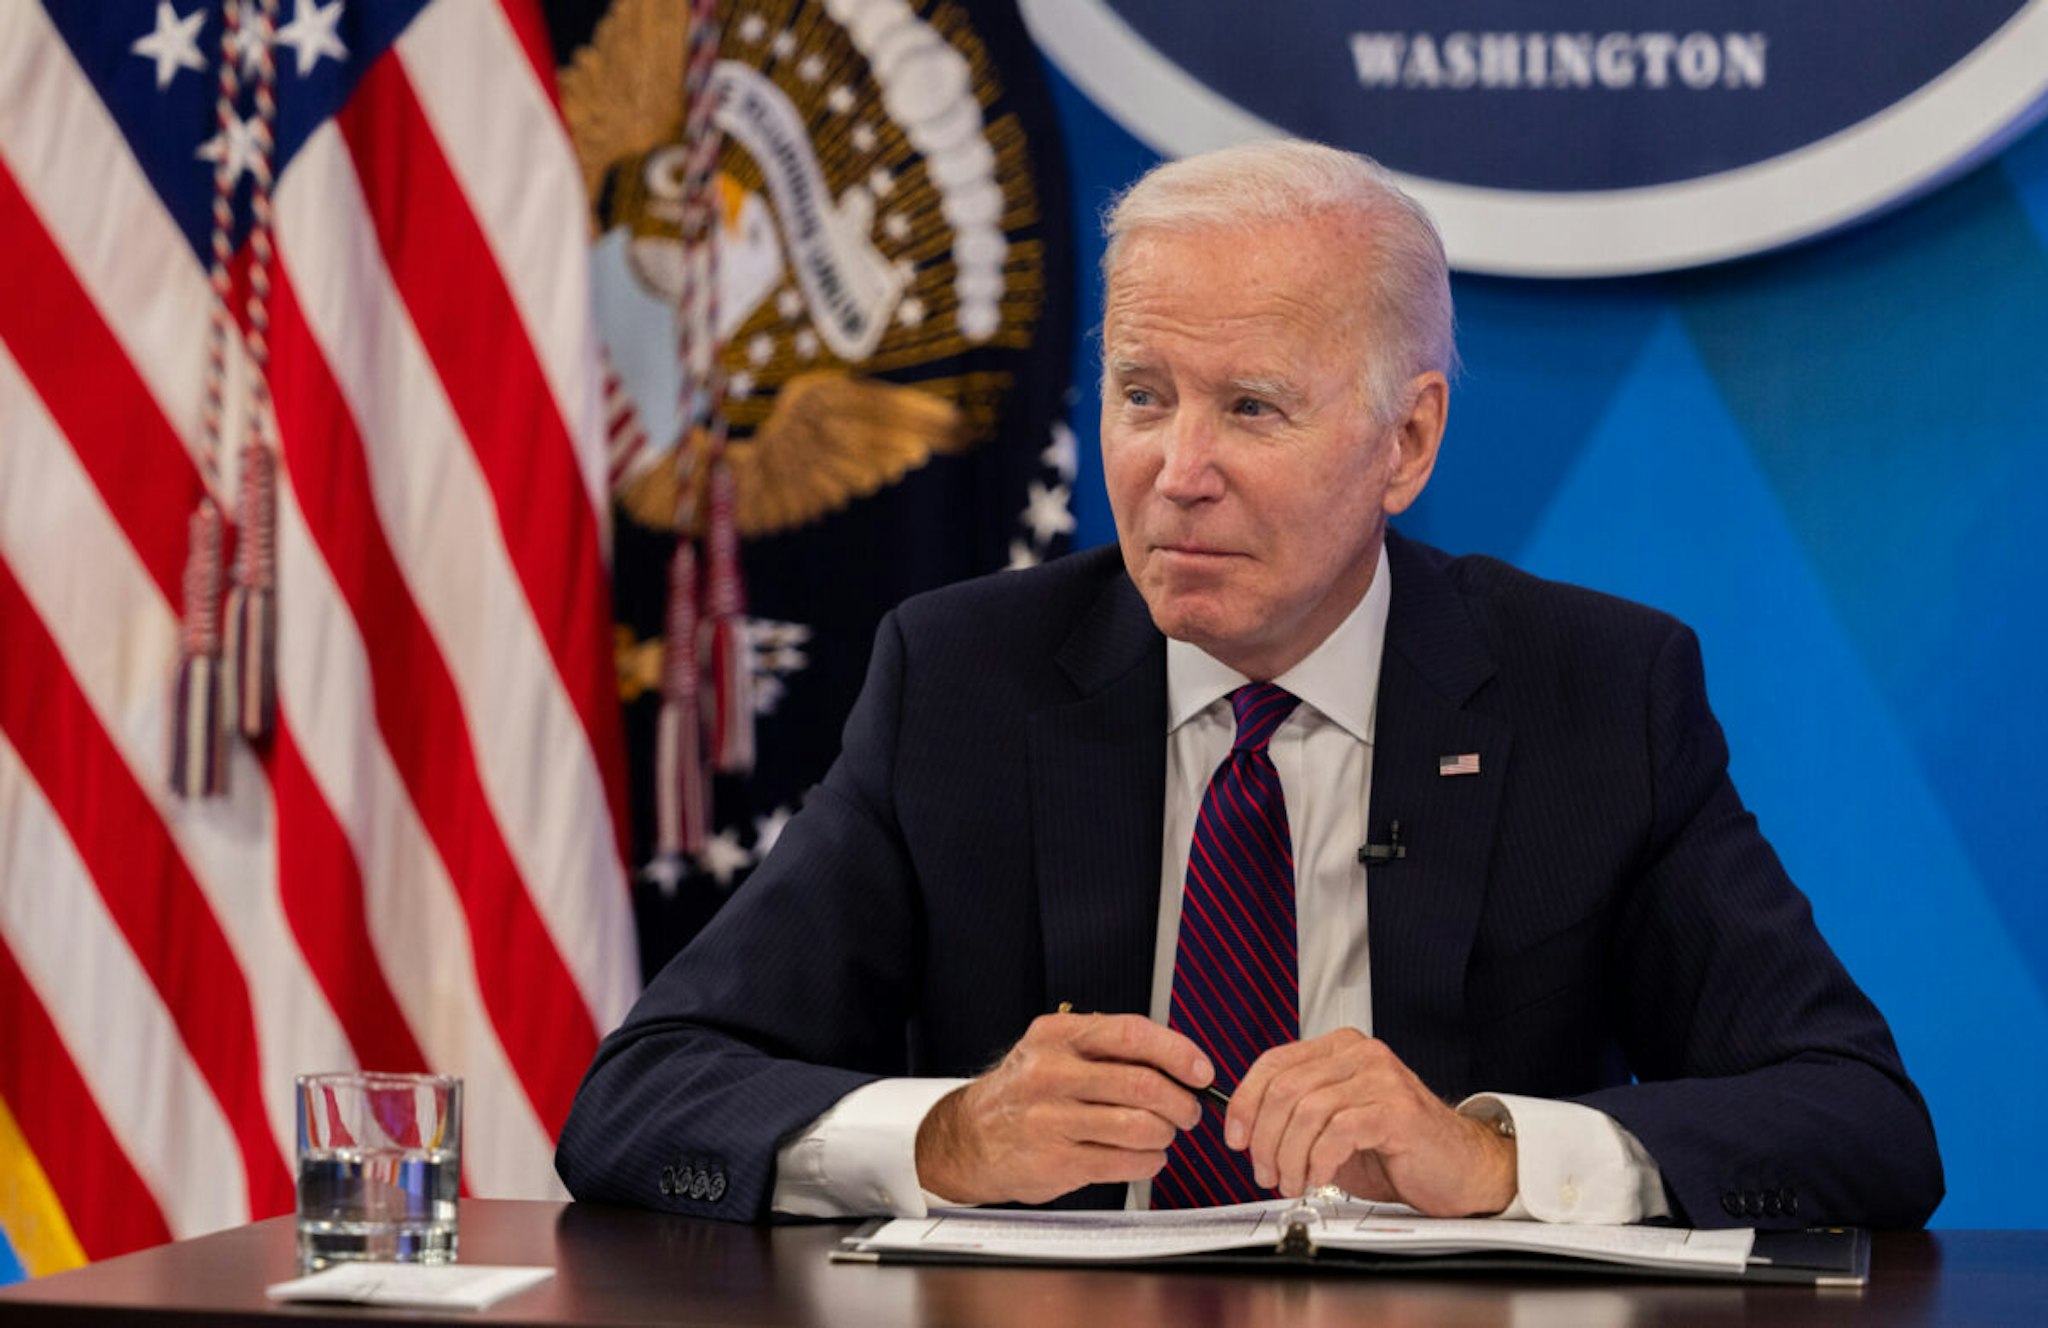 President Joe Biden speaks at an event highlighting grants created by the American Rescue Plan at the White House in Washington, DC on September 2nd, 2022